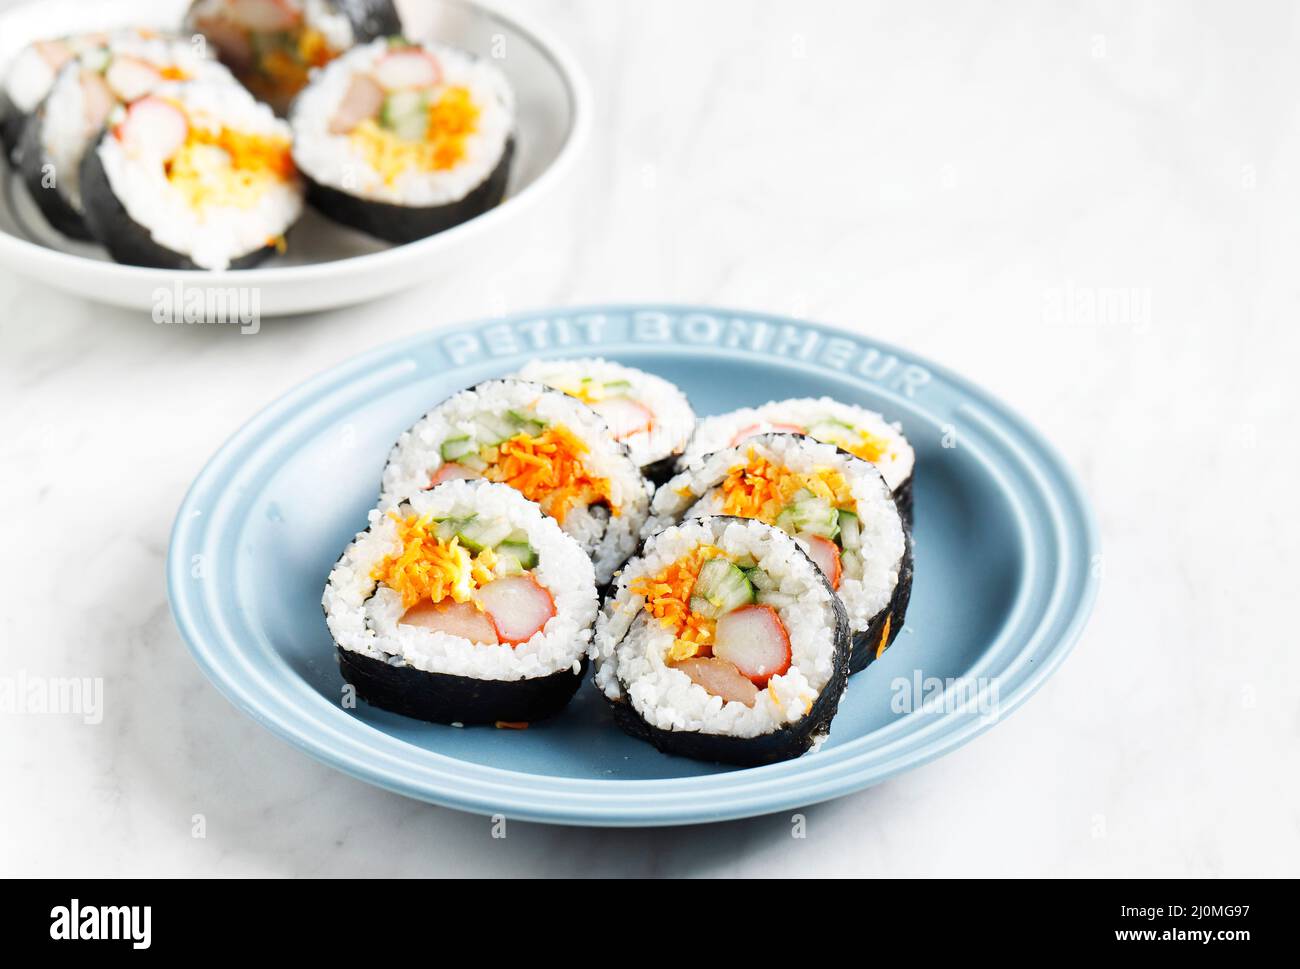 Korean Roll Gimbap (Kimbob or Kimbap) made from Steamed White Rice (Bap) and Various other Ingredients, Such As Kyuri, Carrot, Sausage, Crab Stick, or Stock Photo